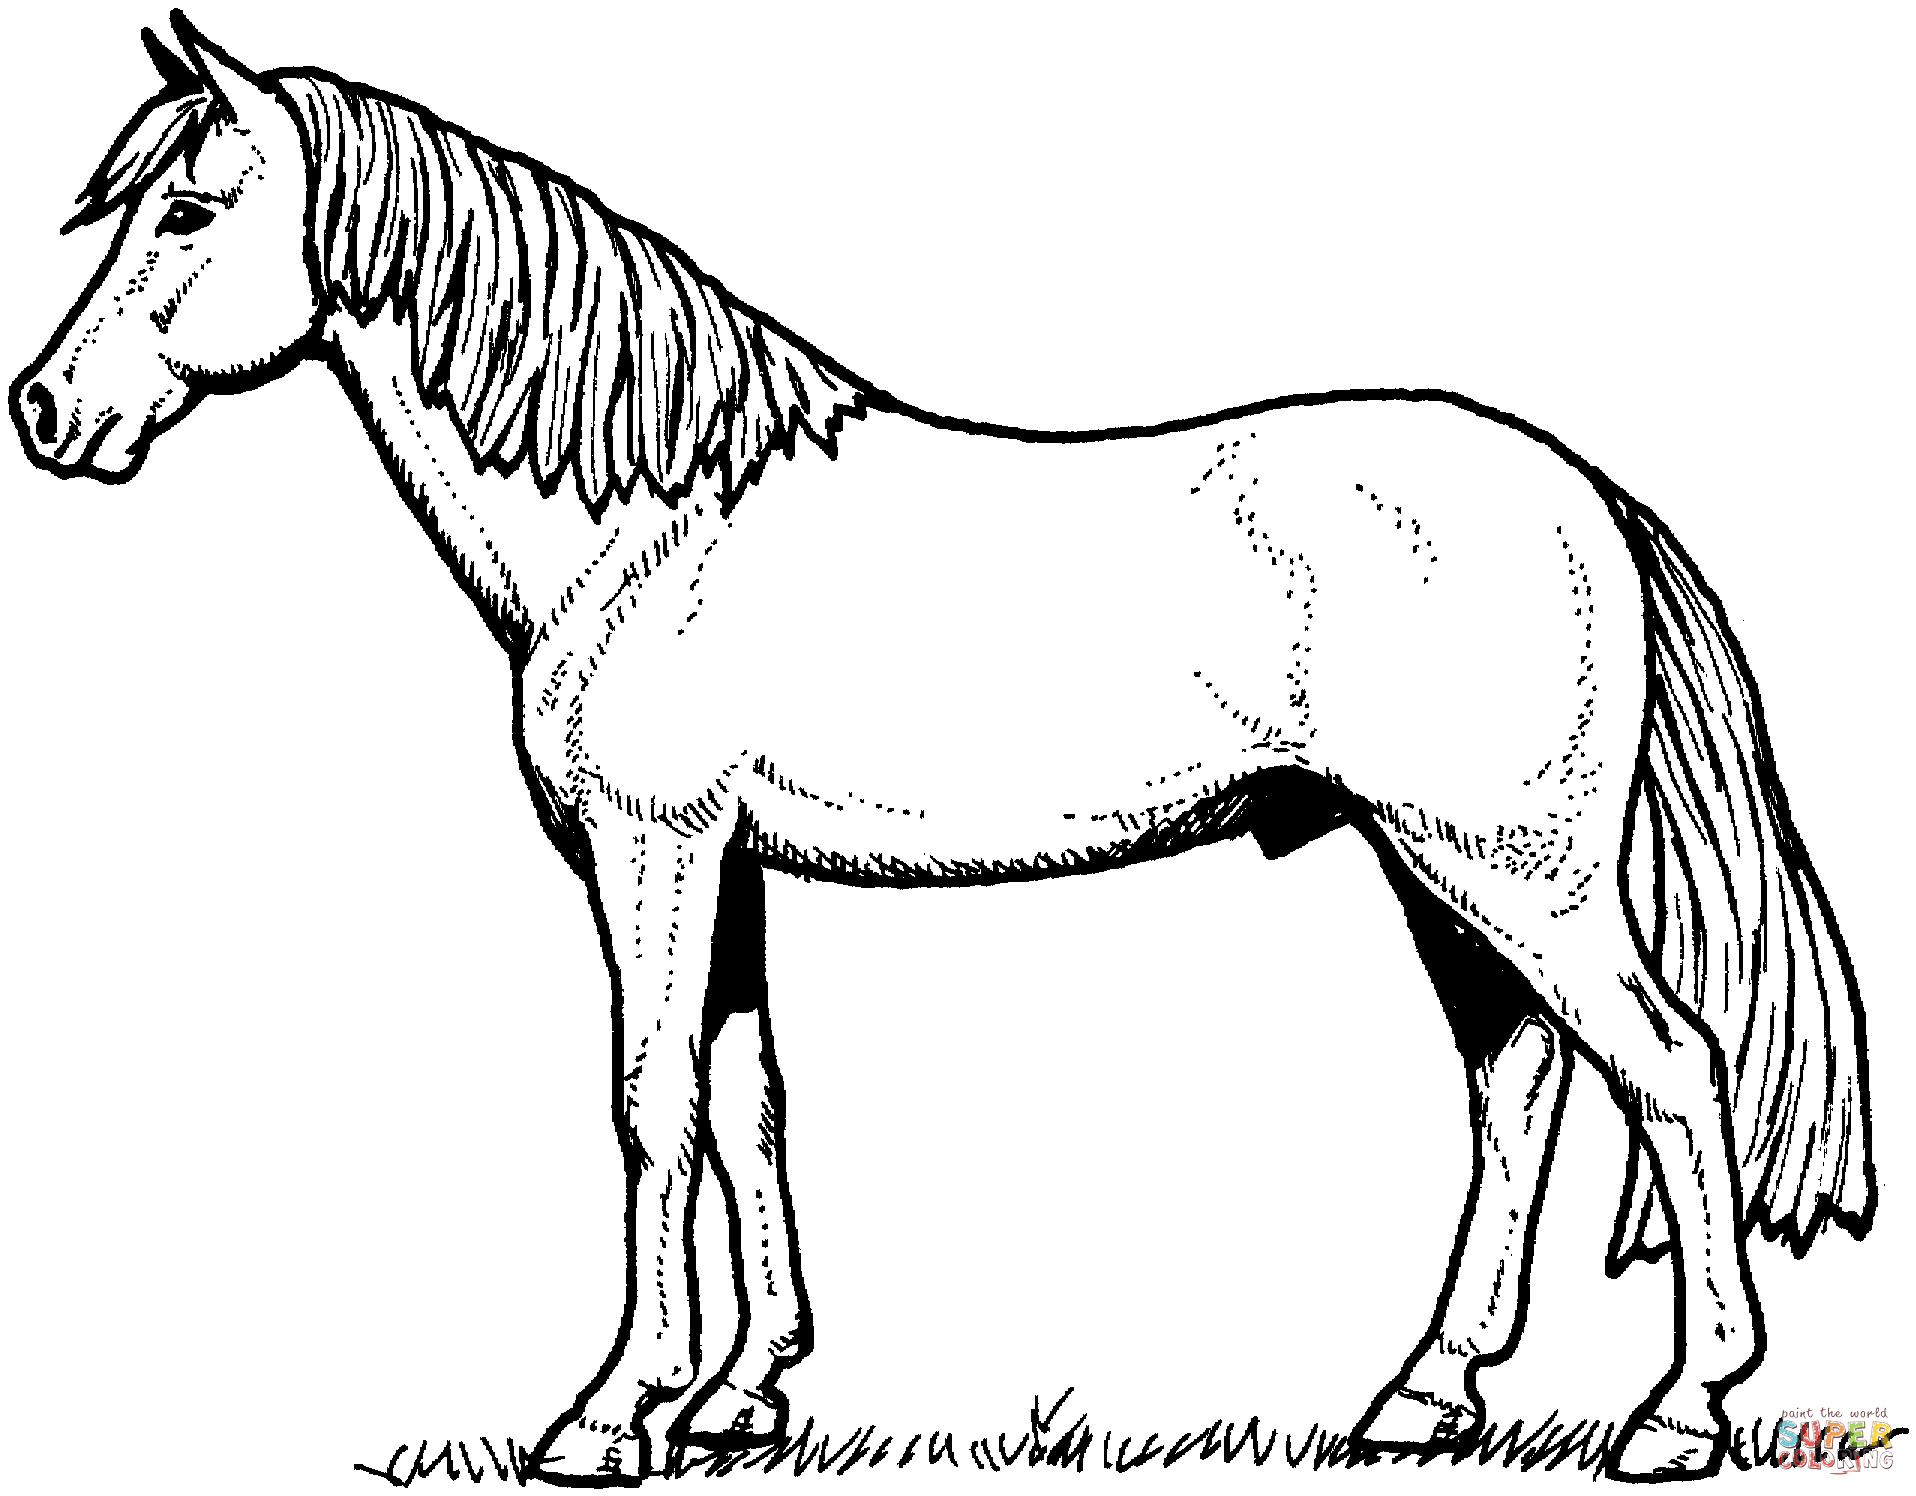 horse coloring images 30 best horse coloring pages ideas we need fun images horse coloring 